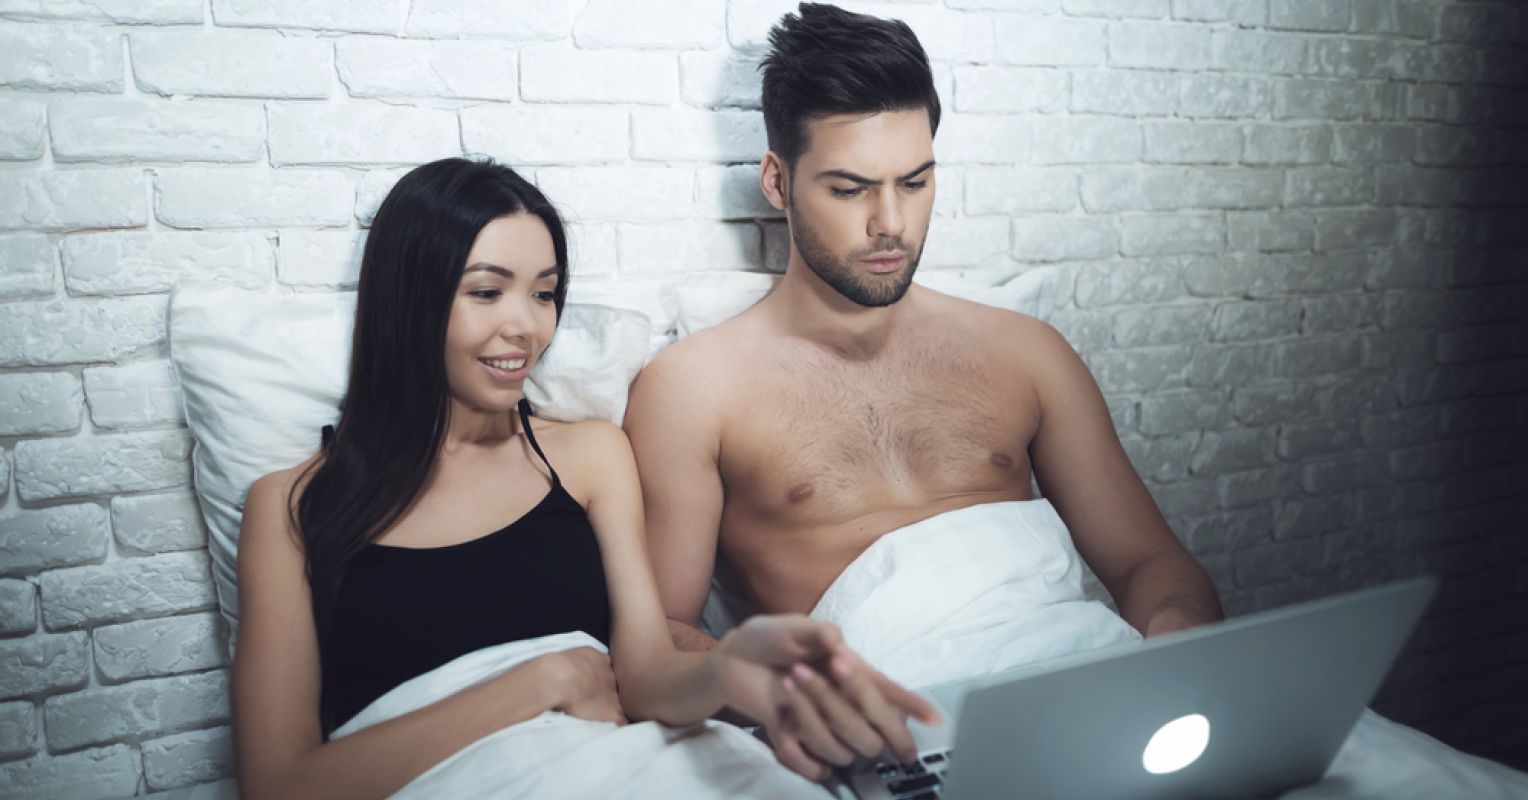 Is Watching Pornography a Form of Cheating? It Depends Psychology Today